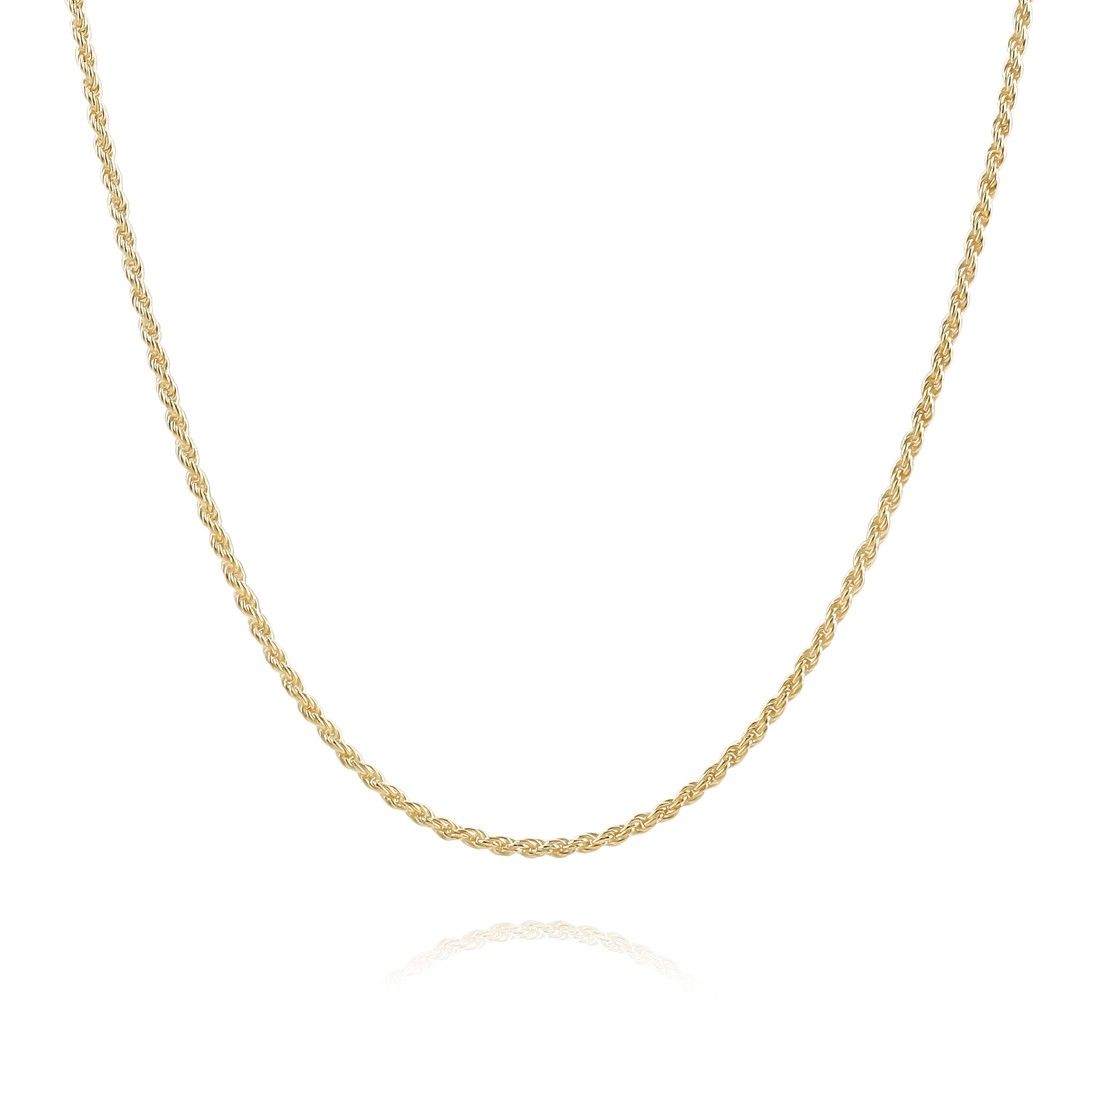 Sterling Silver Rope Chain Necklace - Spero London